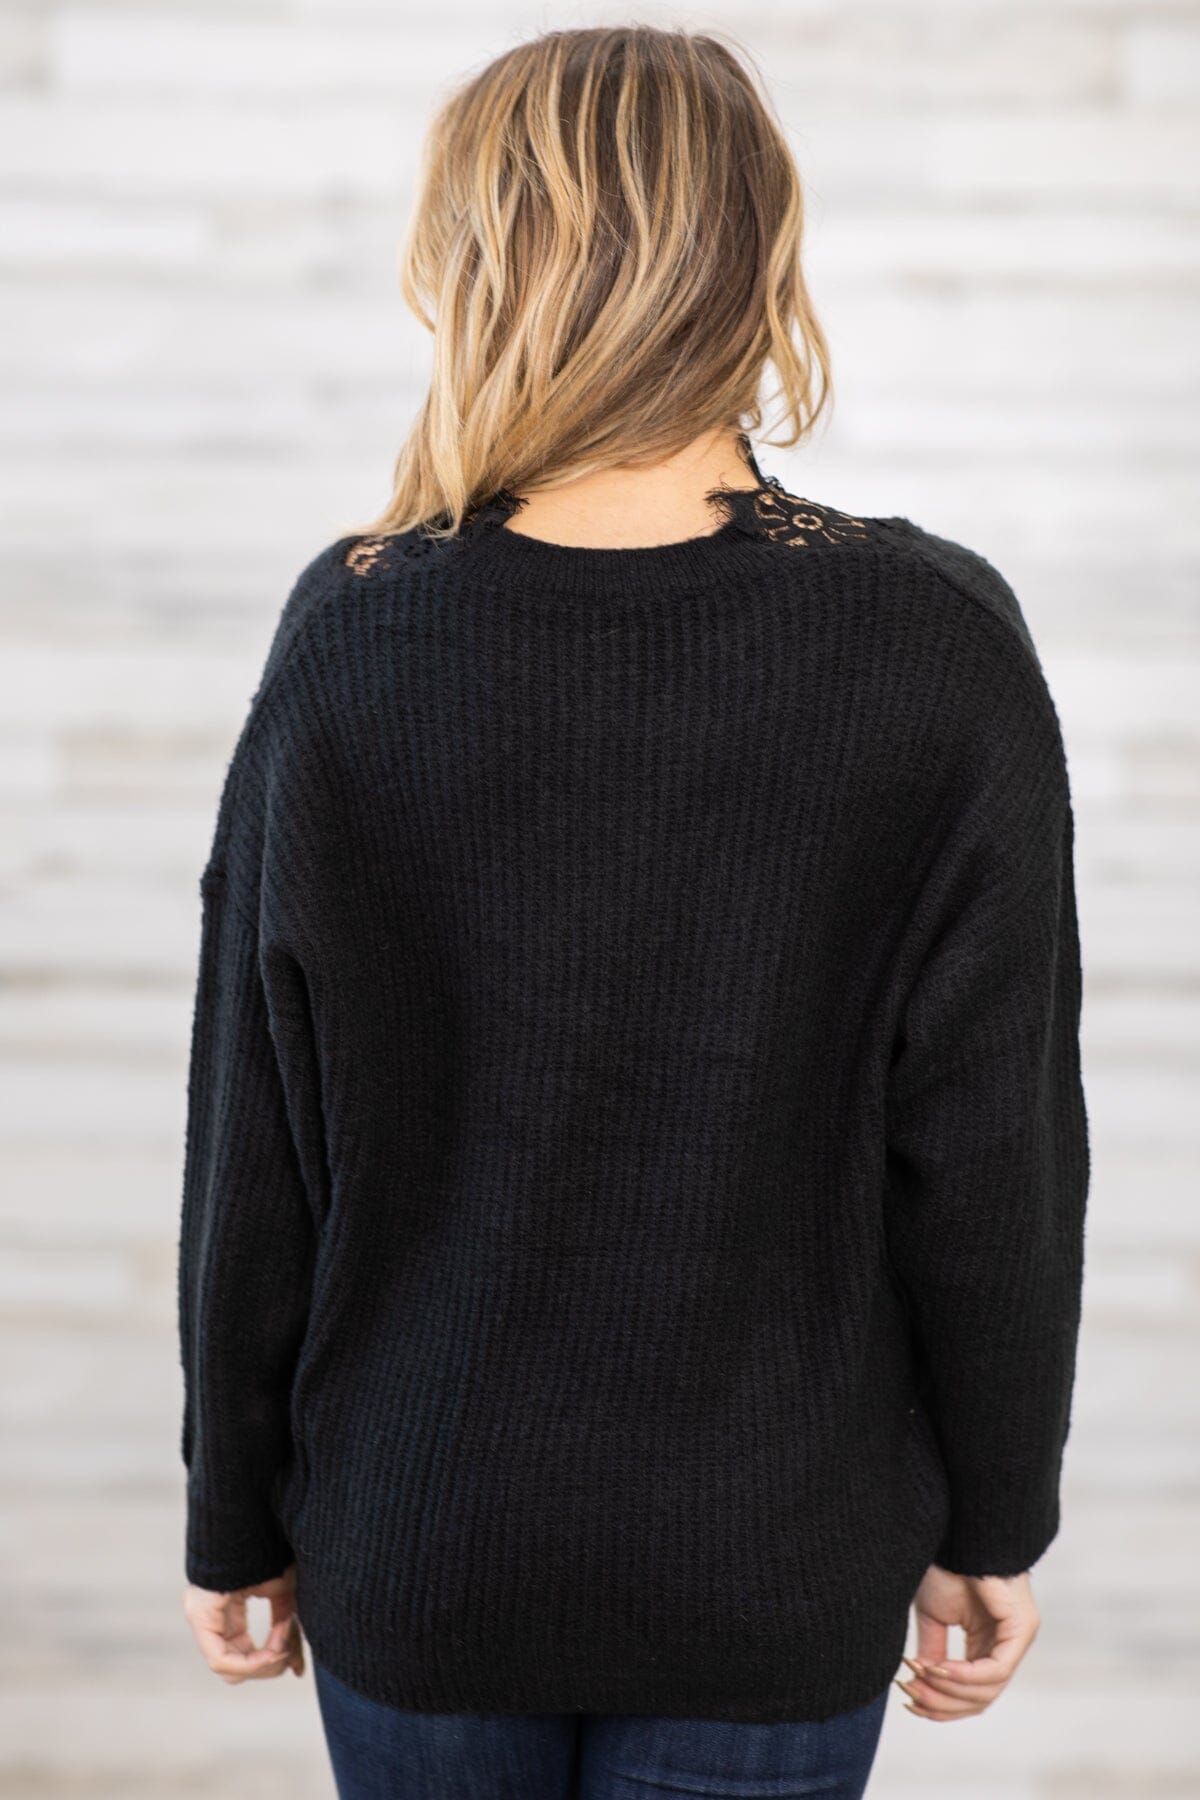 Black Lace Trim Rib Knit Sweater - Filly Flair